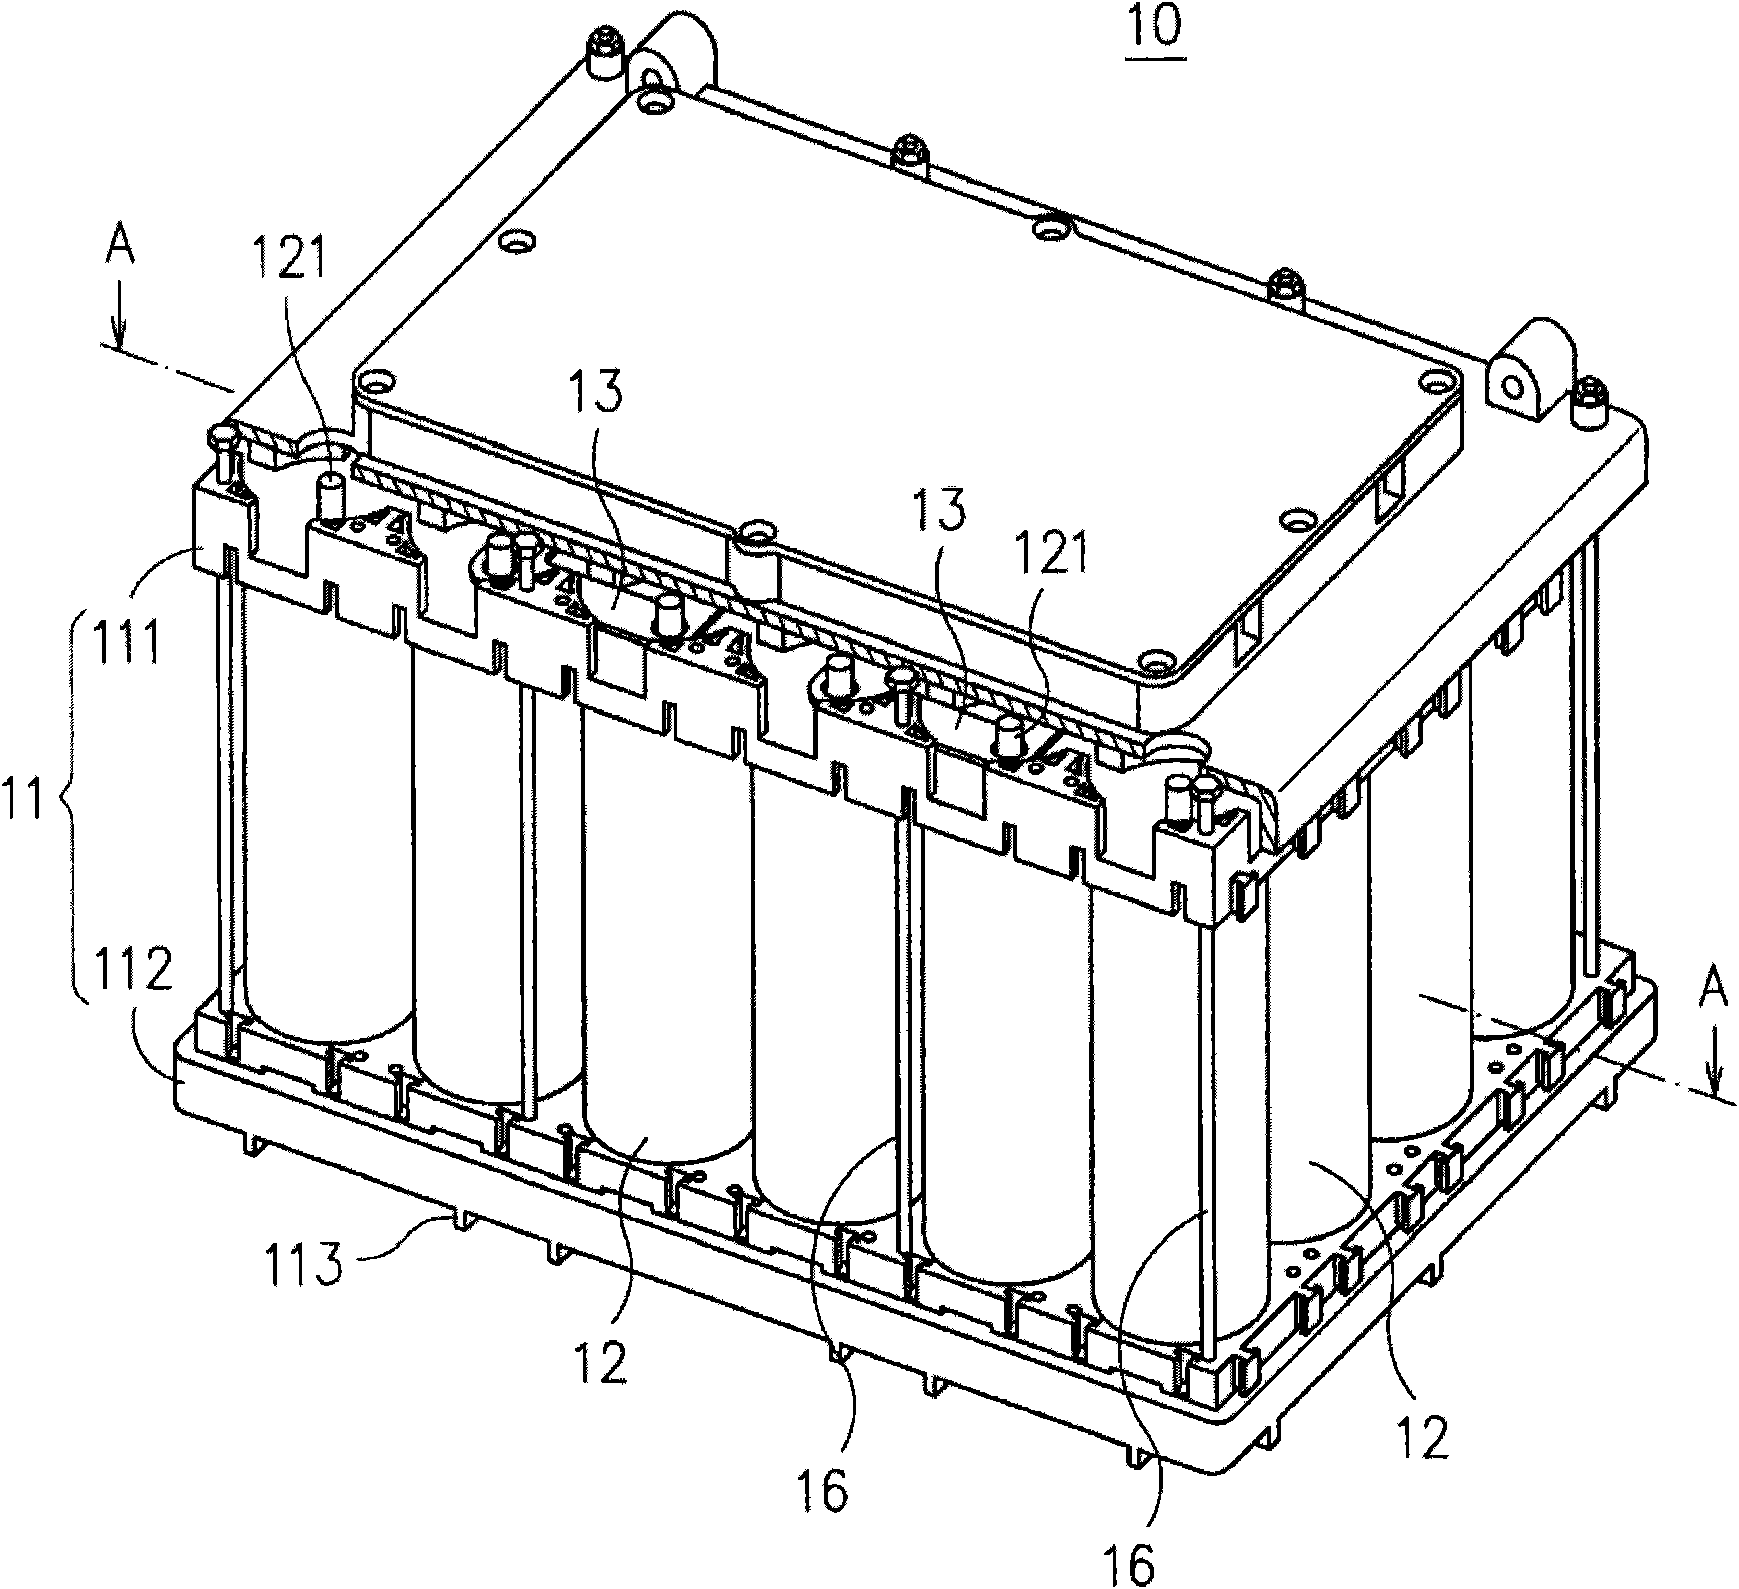 Battery pack with thermal conducting adhesives